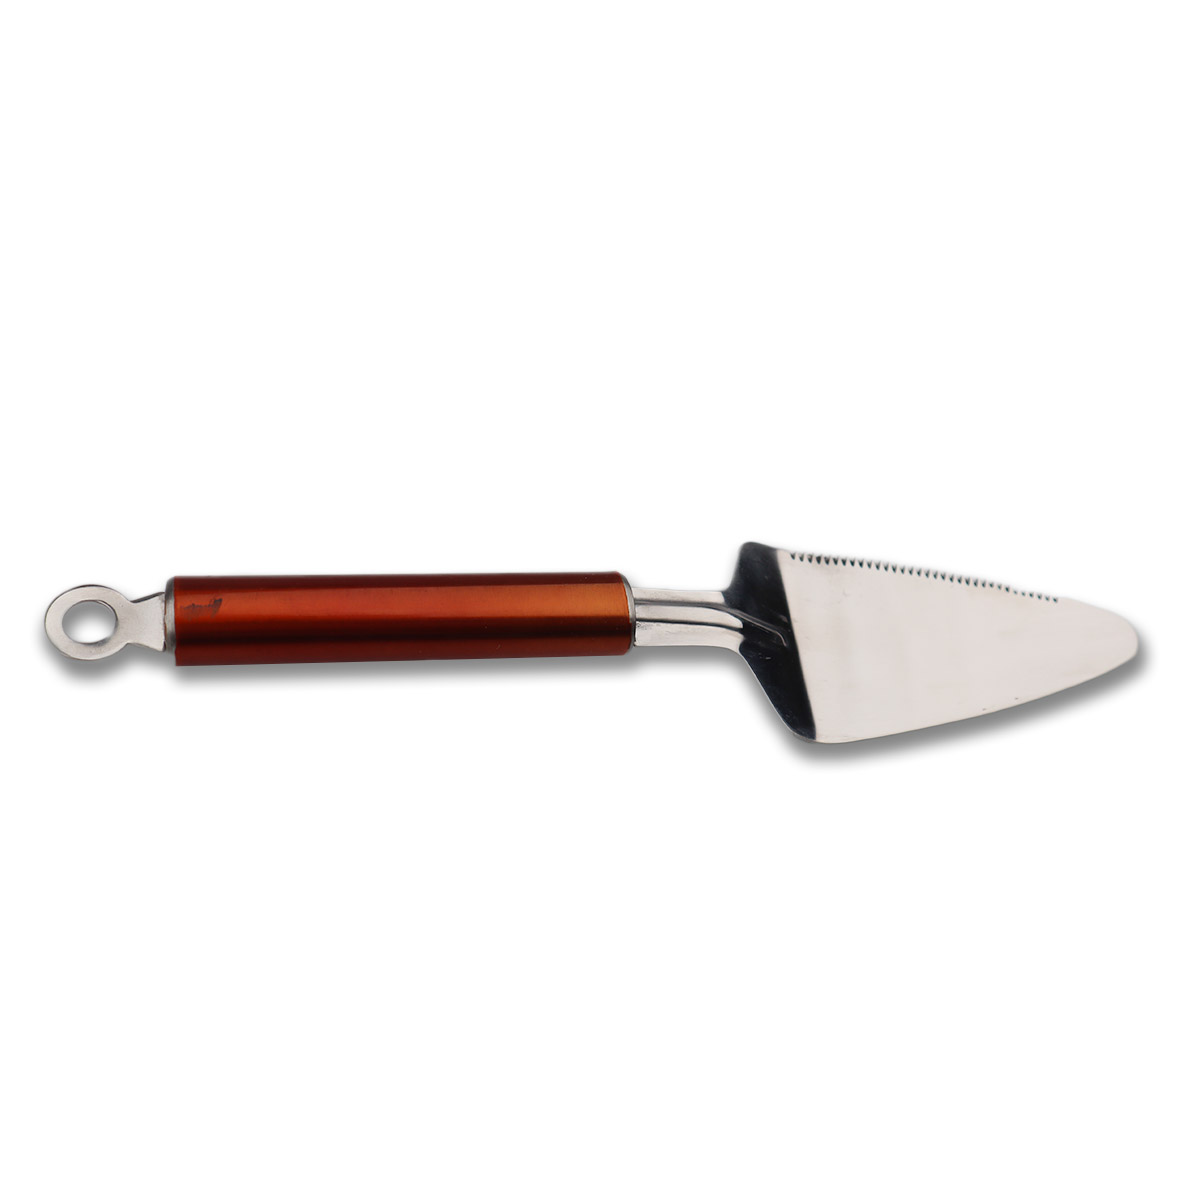 Chef Stainless Steel Cake / Pizza Lifter - Pizza Slicer And Server with copper handle